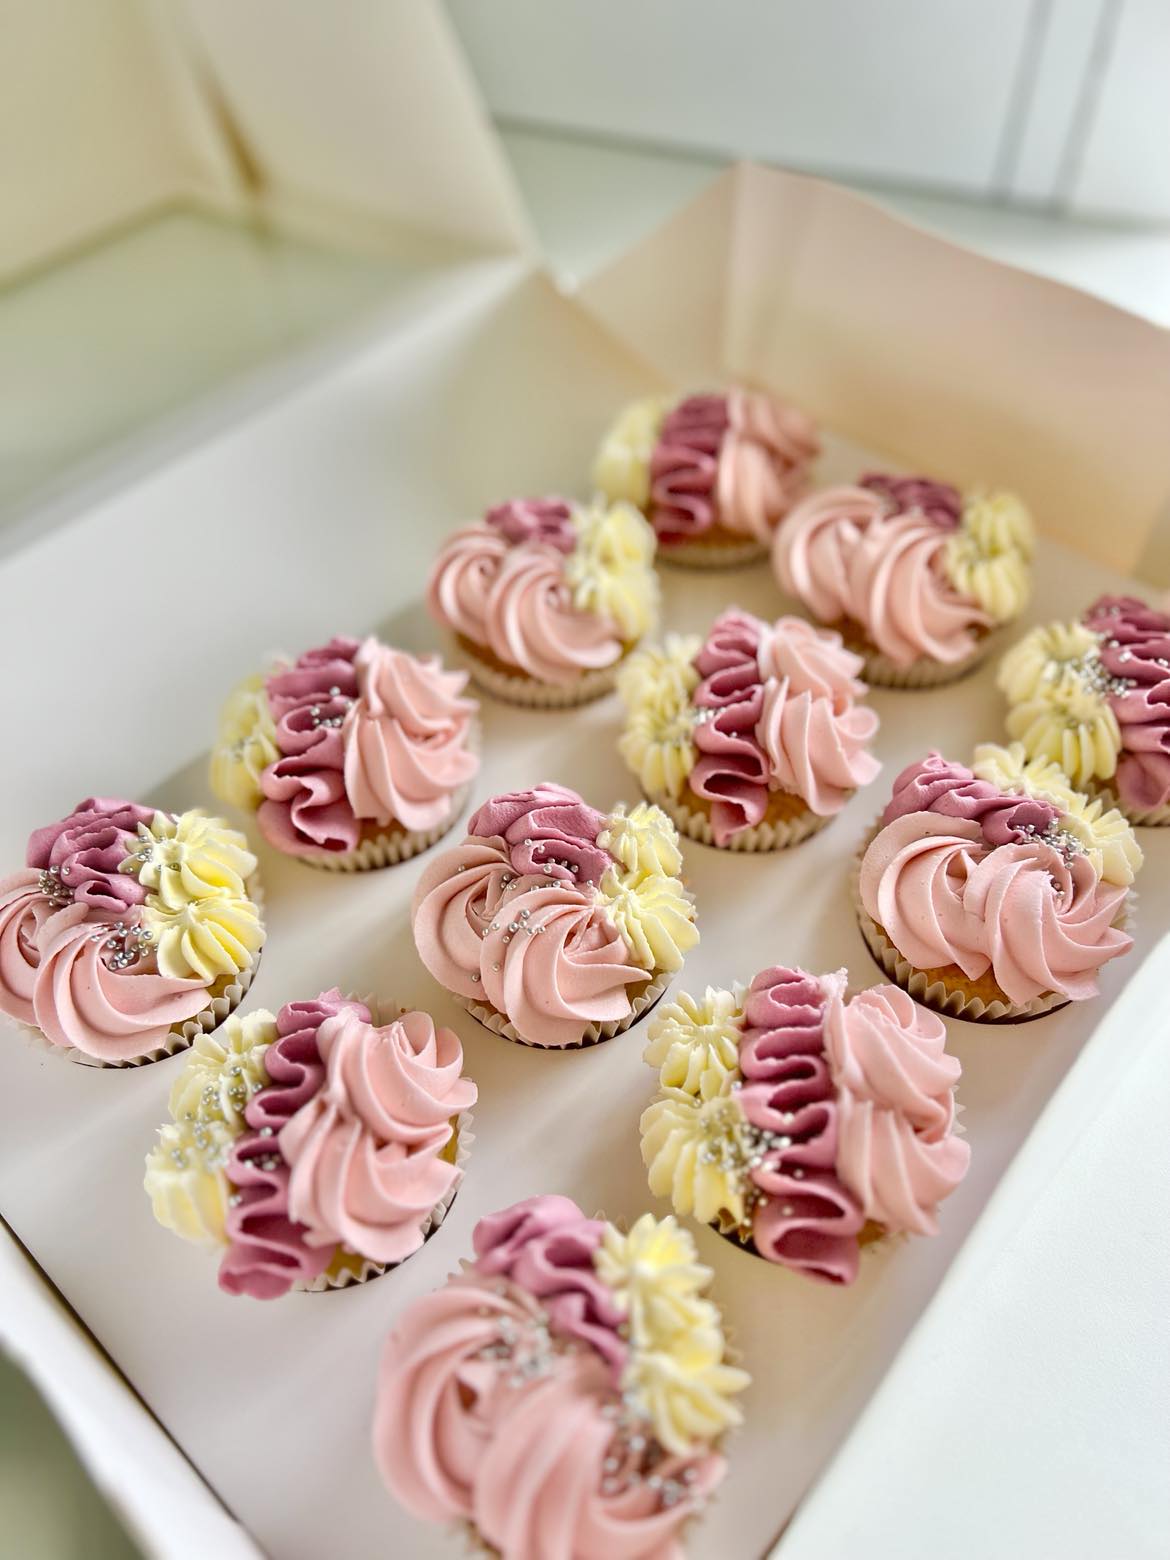 Buttercream and bubbles - Saturday 18th May, 1-2:30pm